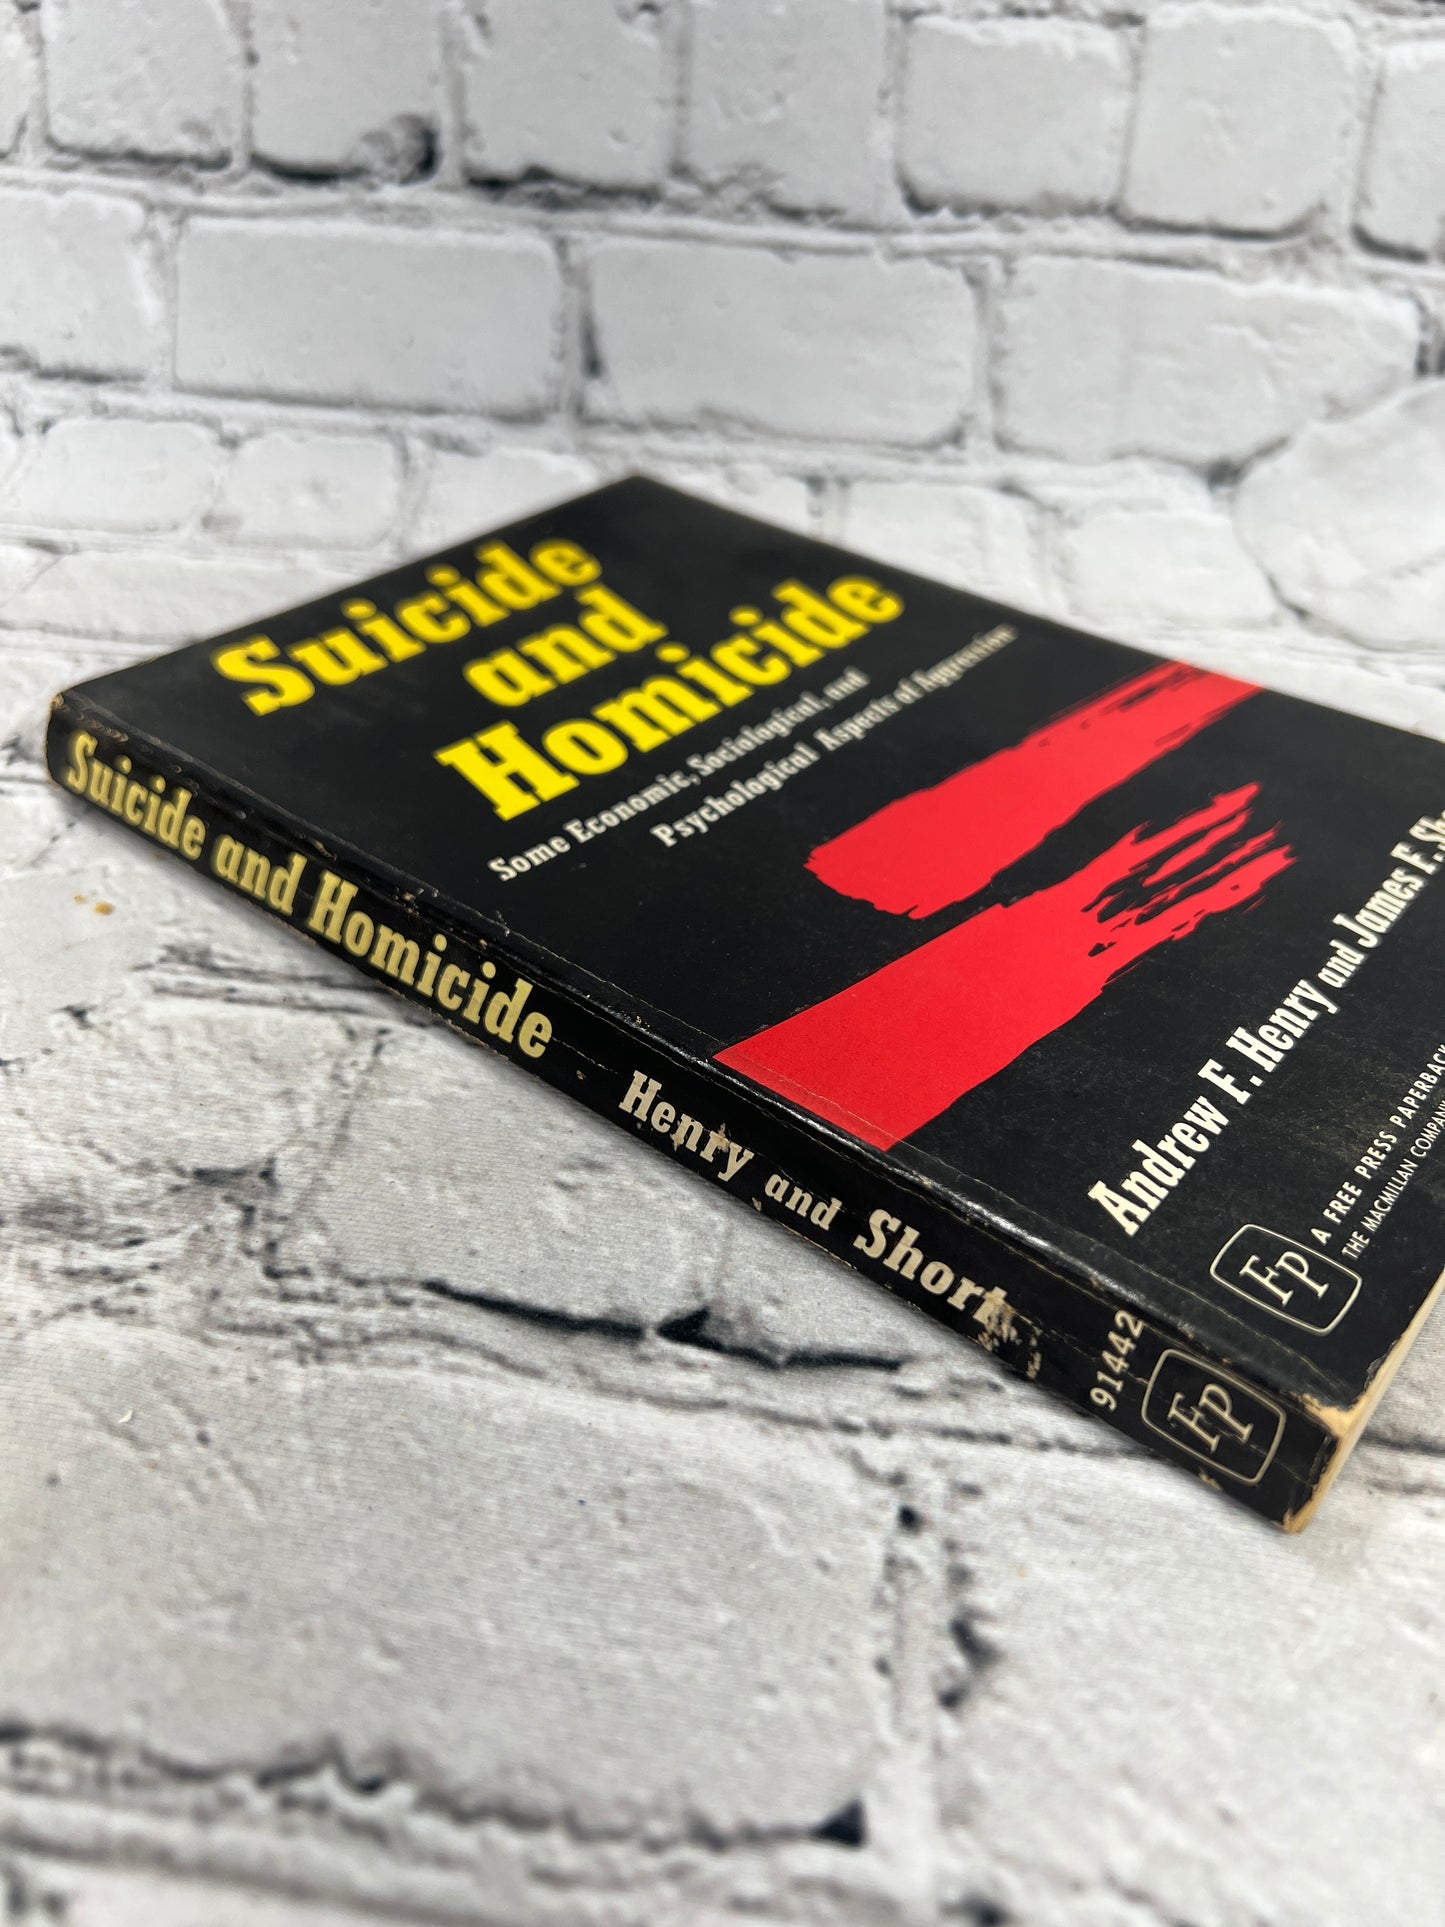 Suicide and Homicide By Andrew F Henry [2nd Printing · 1965]